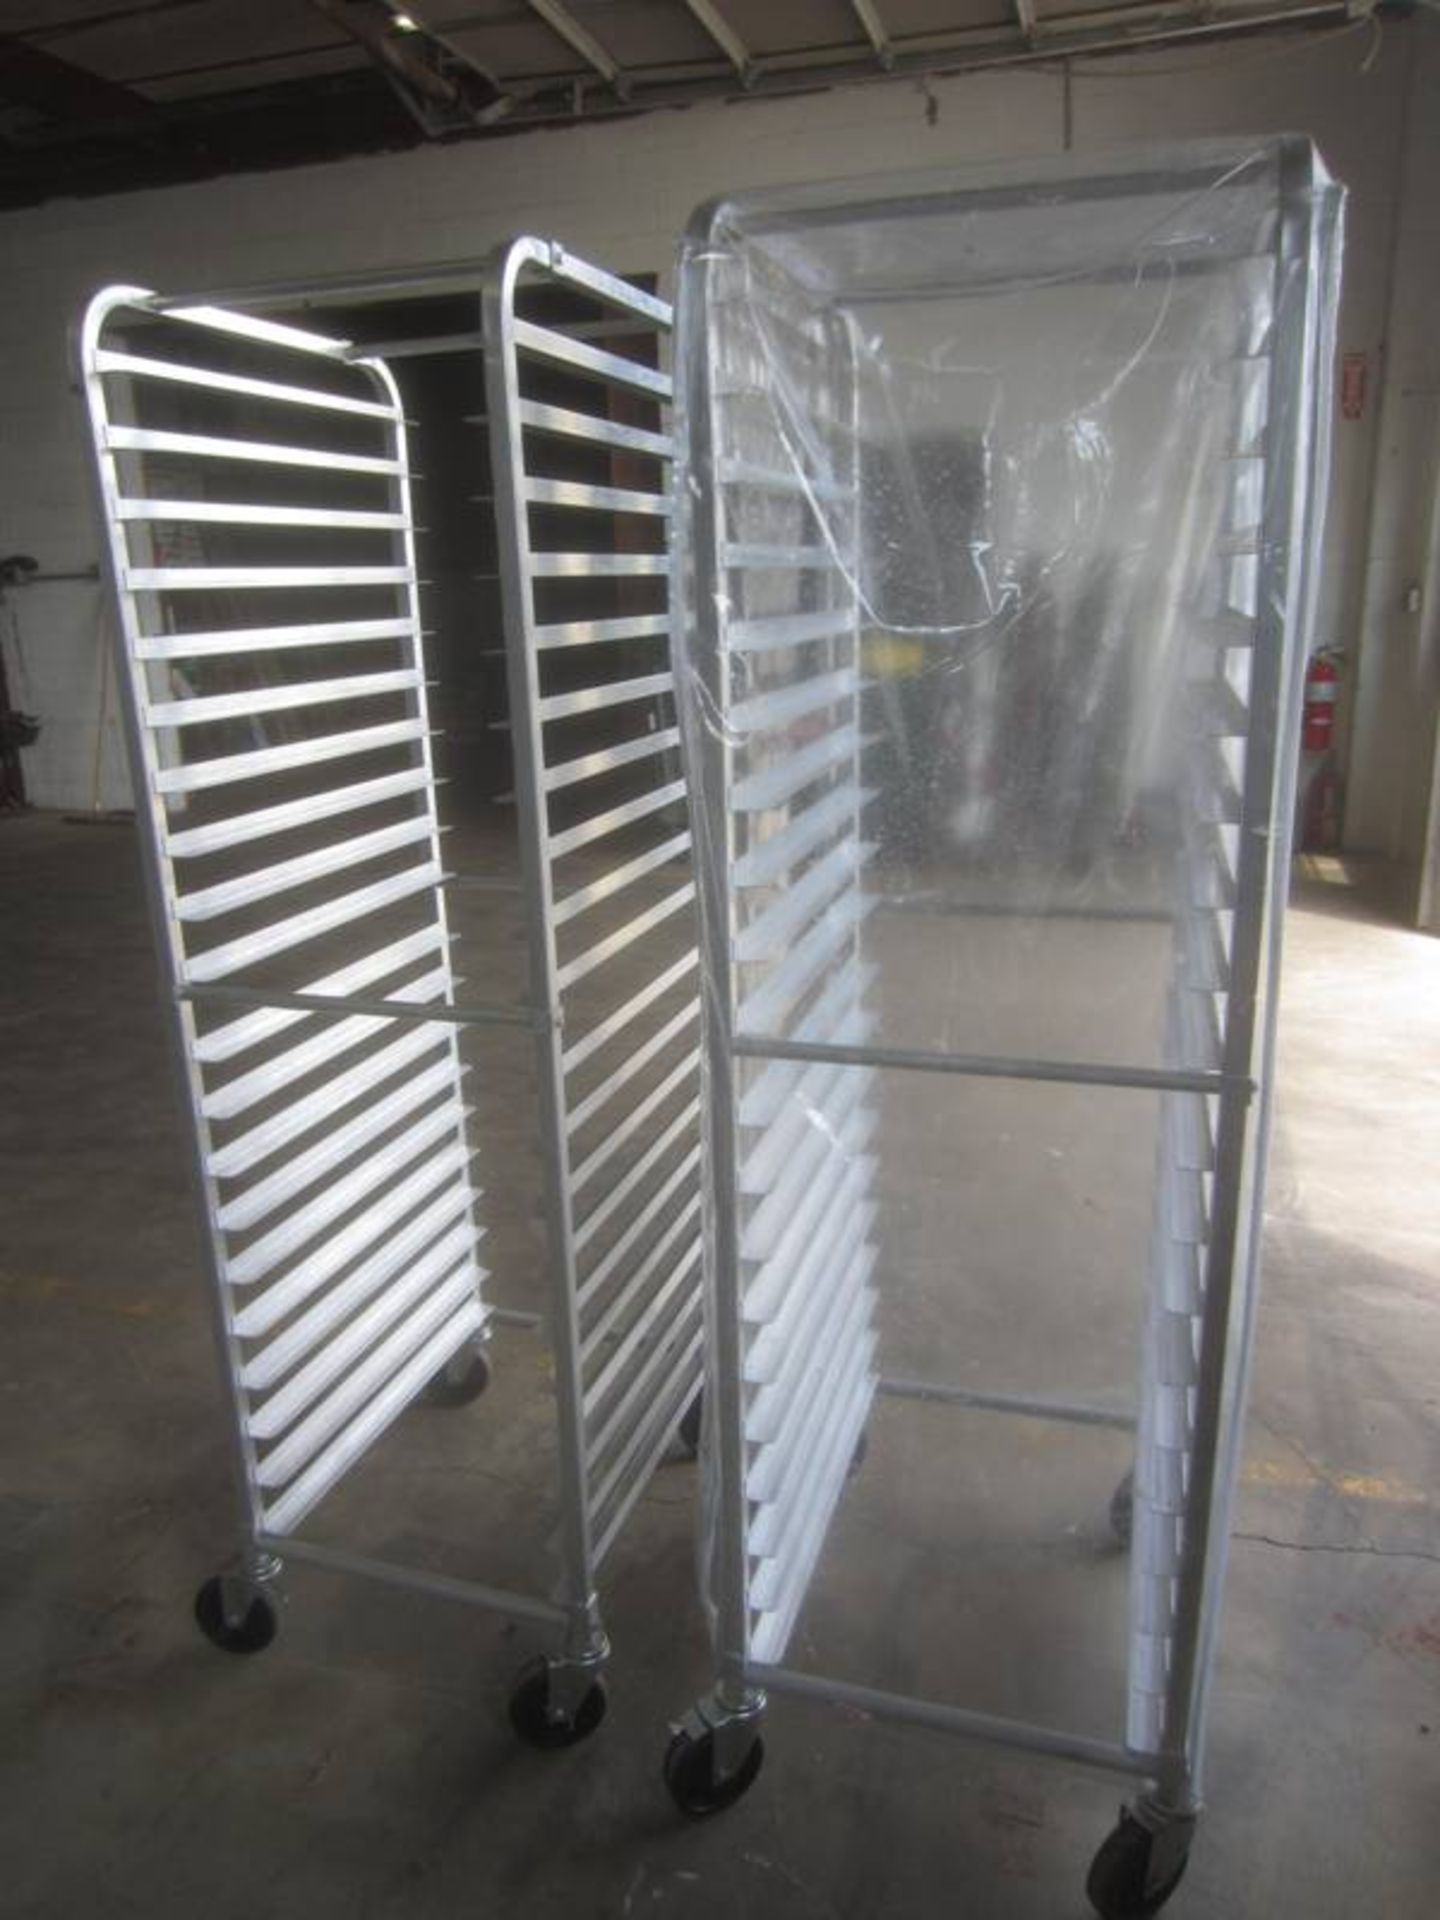 Aluminum Rack, 8" W X 26" L X 70" T, 20 shelves spaced 3" apart, on wheels, plastic covers - Image 2 of 2